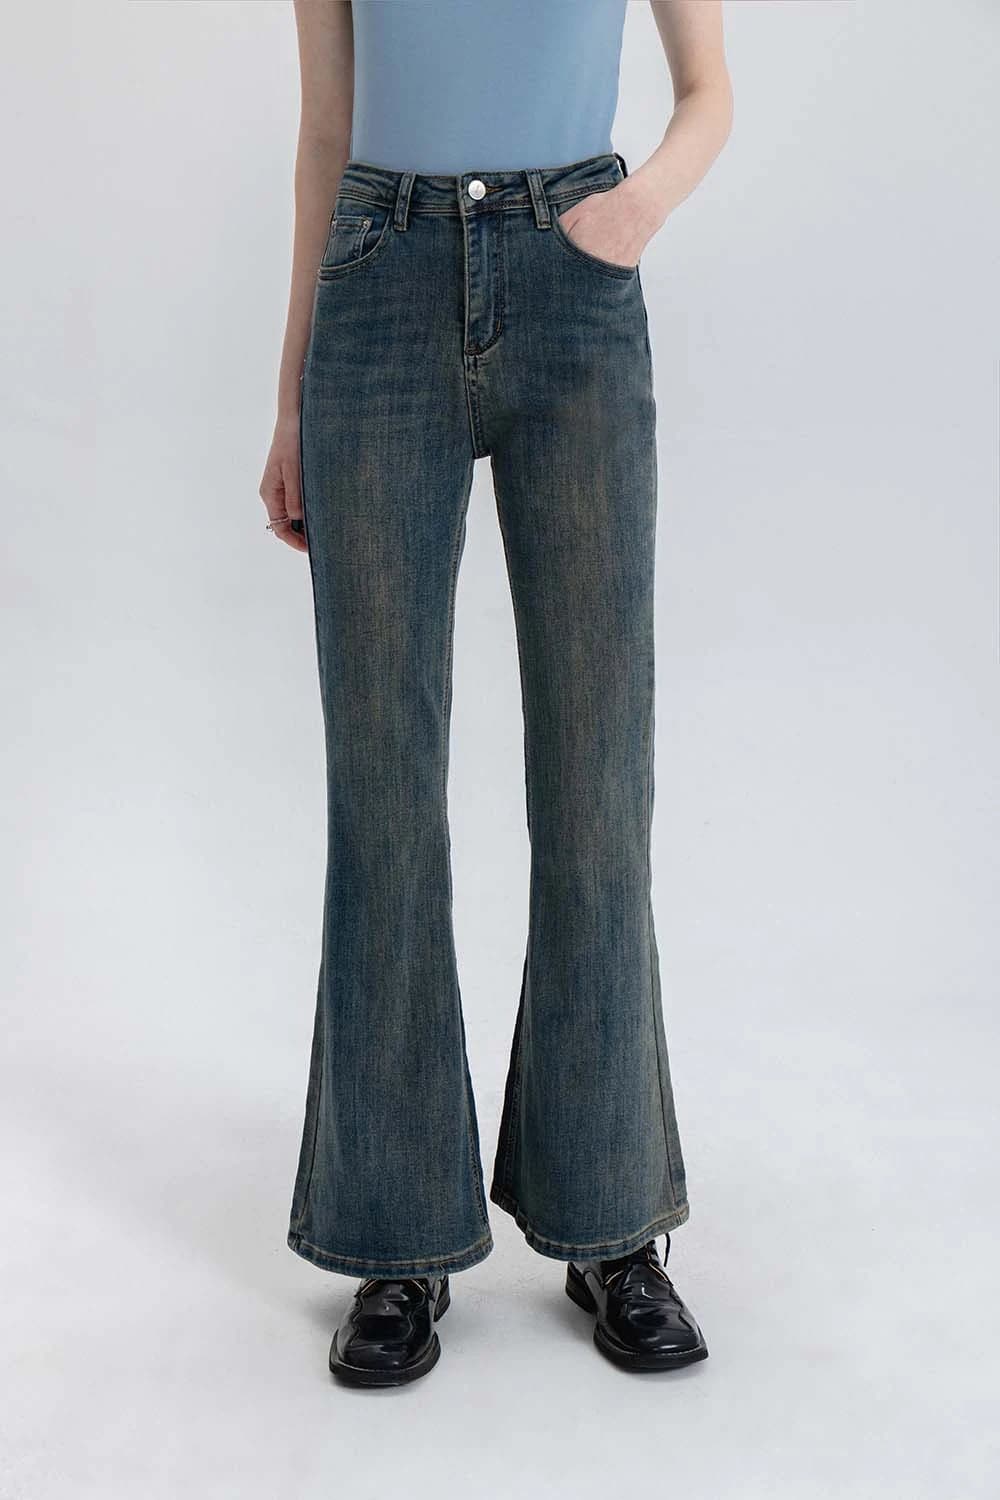 Chic Vintage Flared Jeans